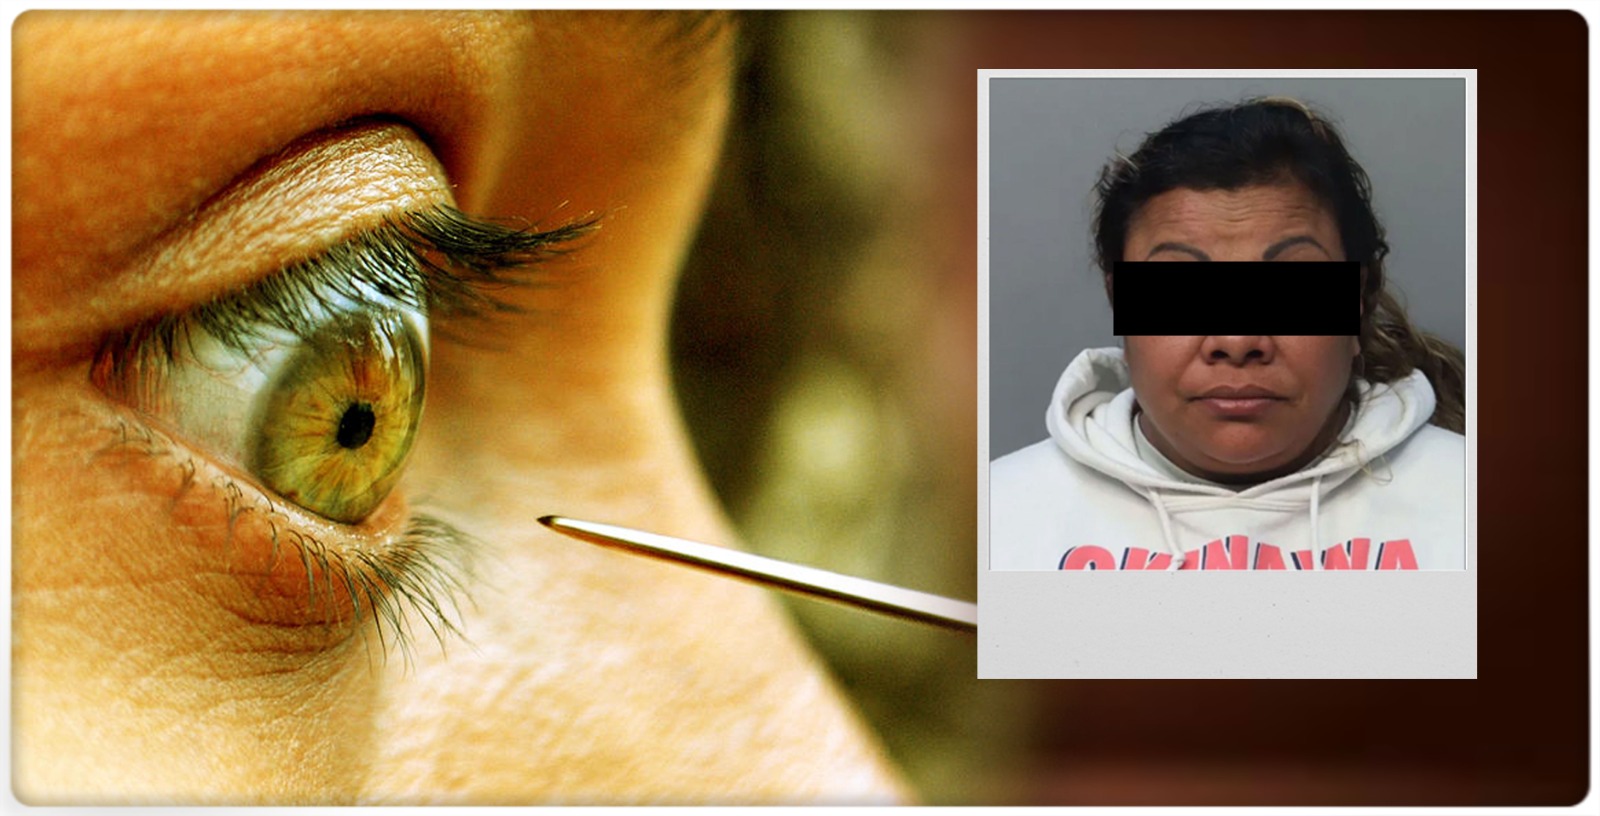 US Woman Stabs Boyfriend in Eye with Needle for Looking At Other Women